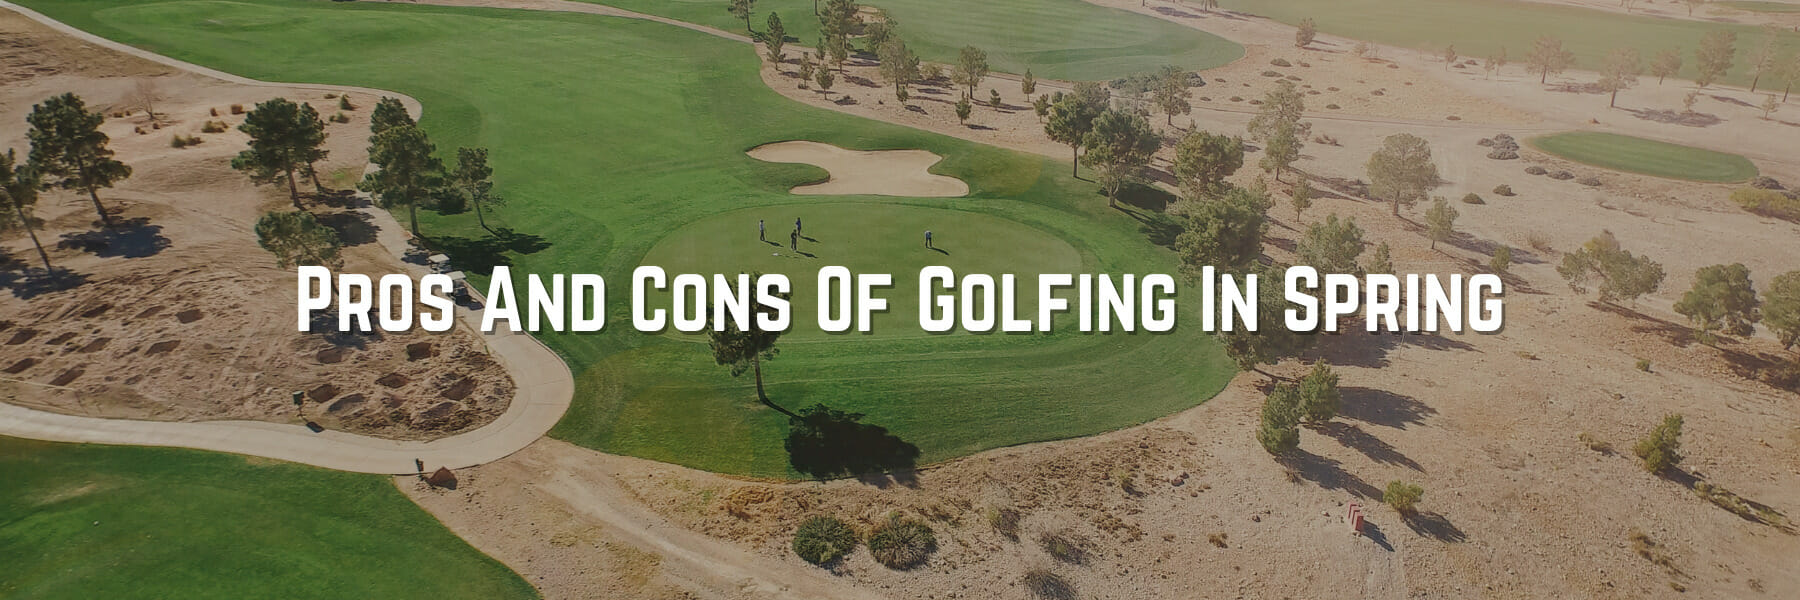 Pros And Cons Of Golfing In The Spring